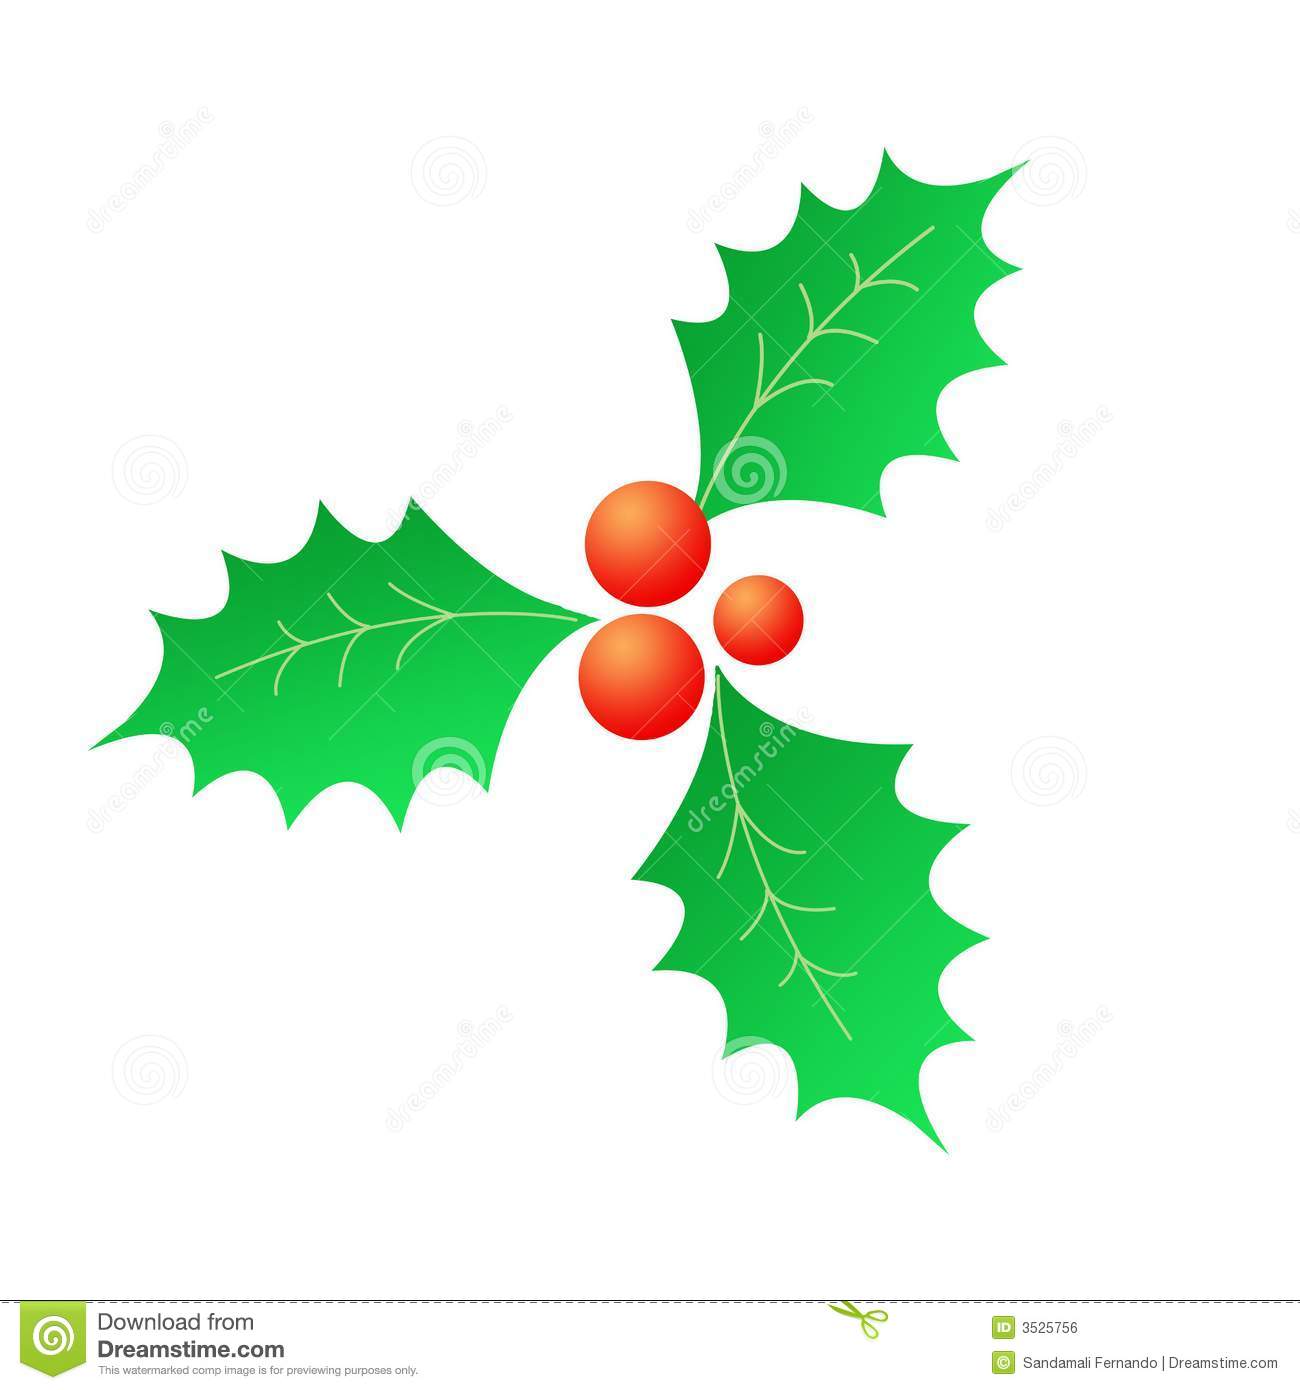 Illustration   Clip Art Christmas Graphics   Clipping Path Included